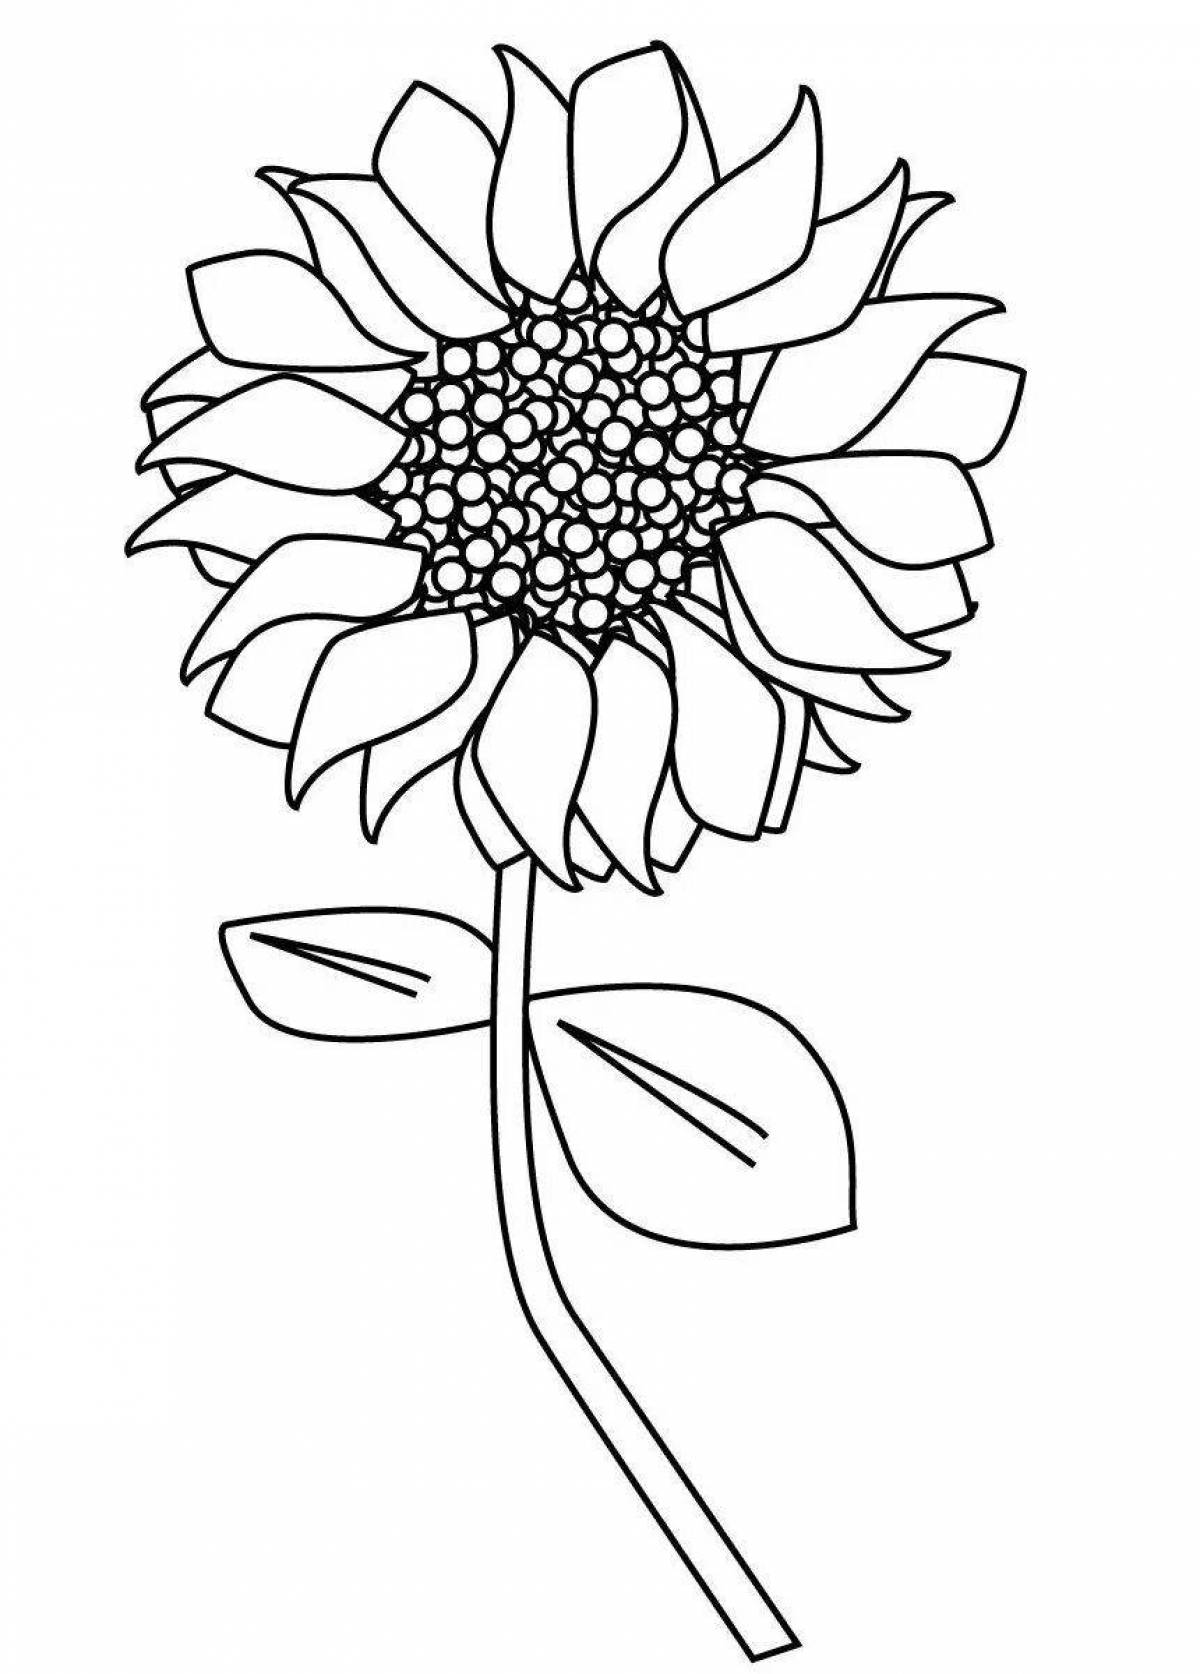 Great sunflowers coloring book for preschoolers 2-3 years old